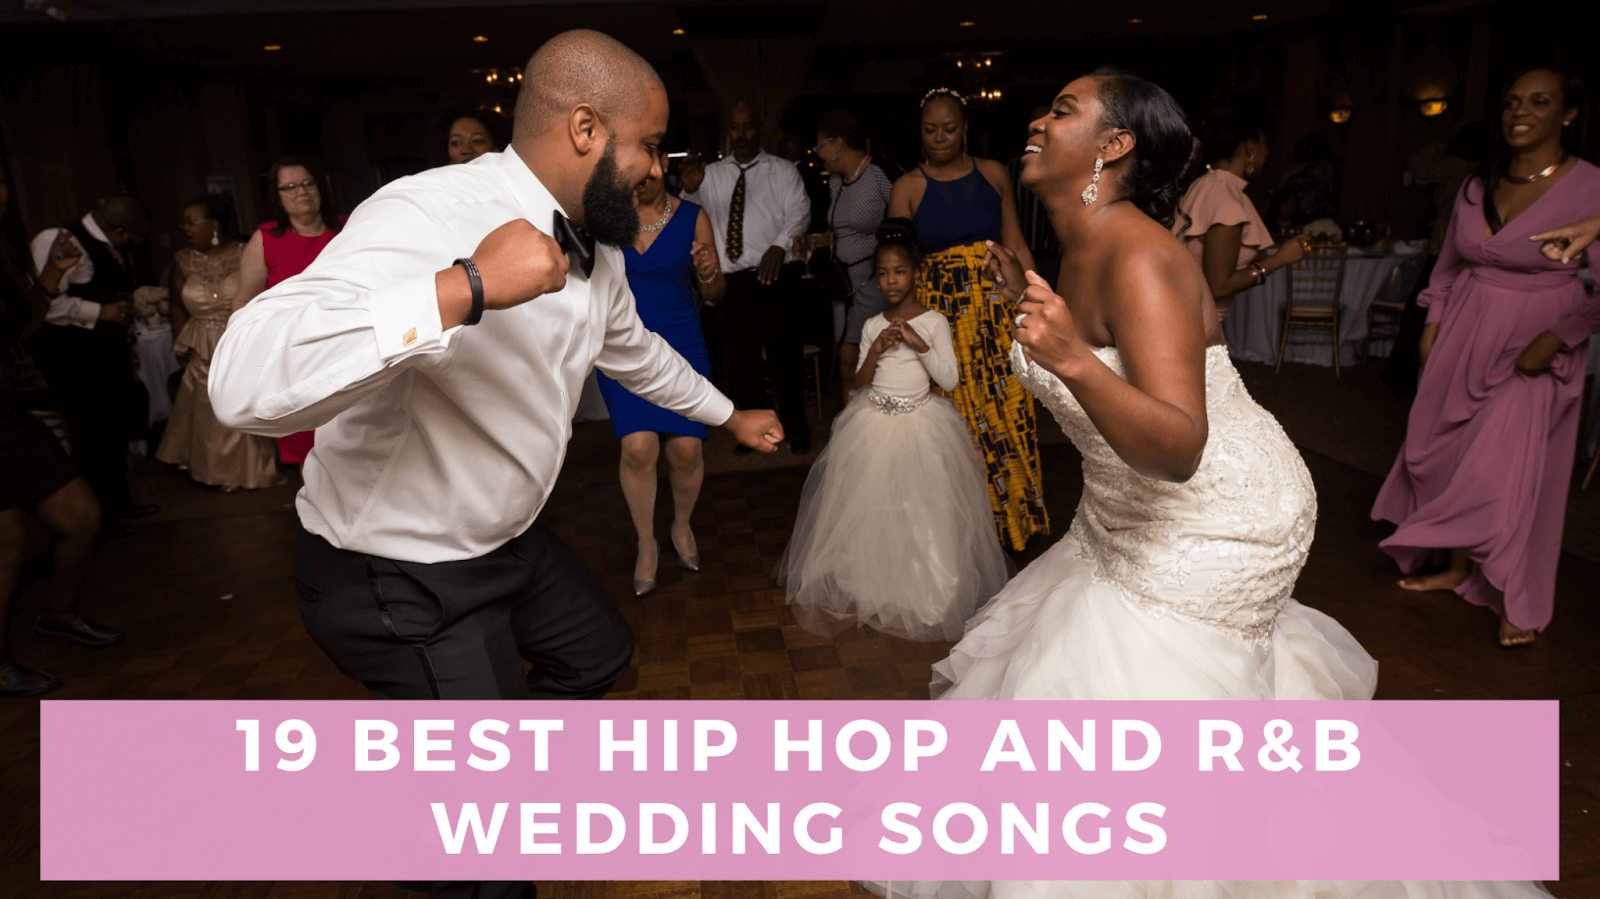 The 20 Best R&B Wedding Songs of All Time